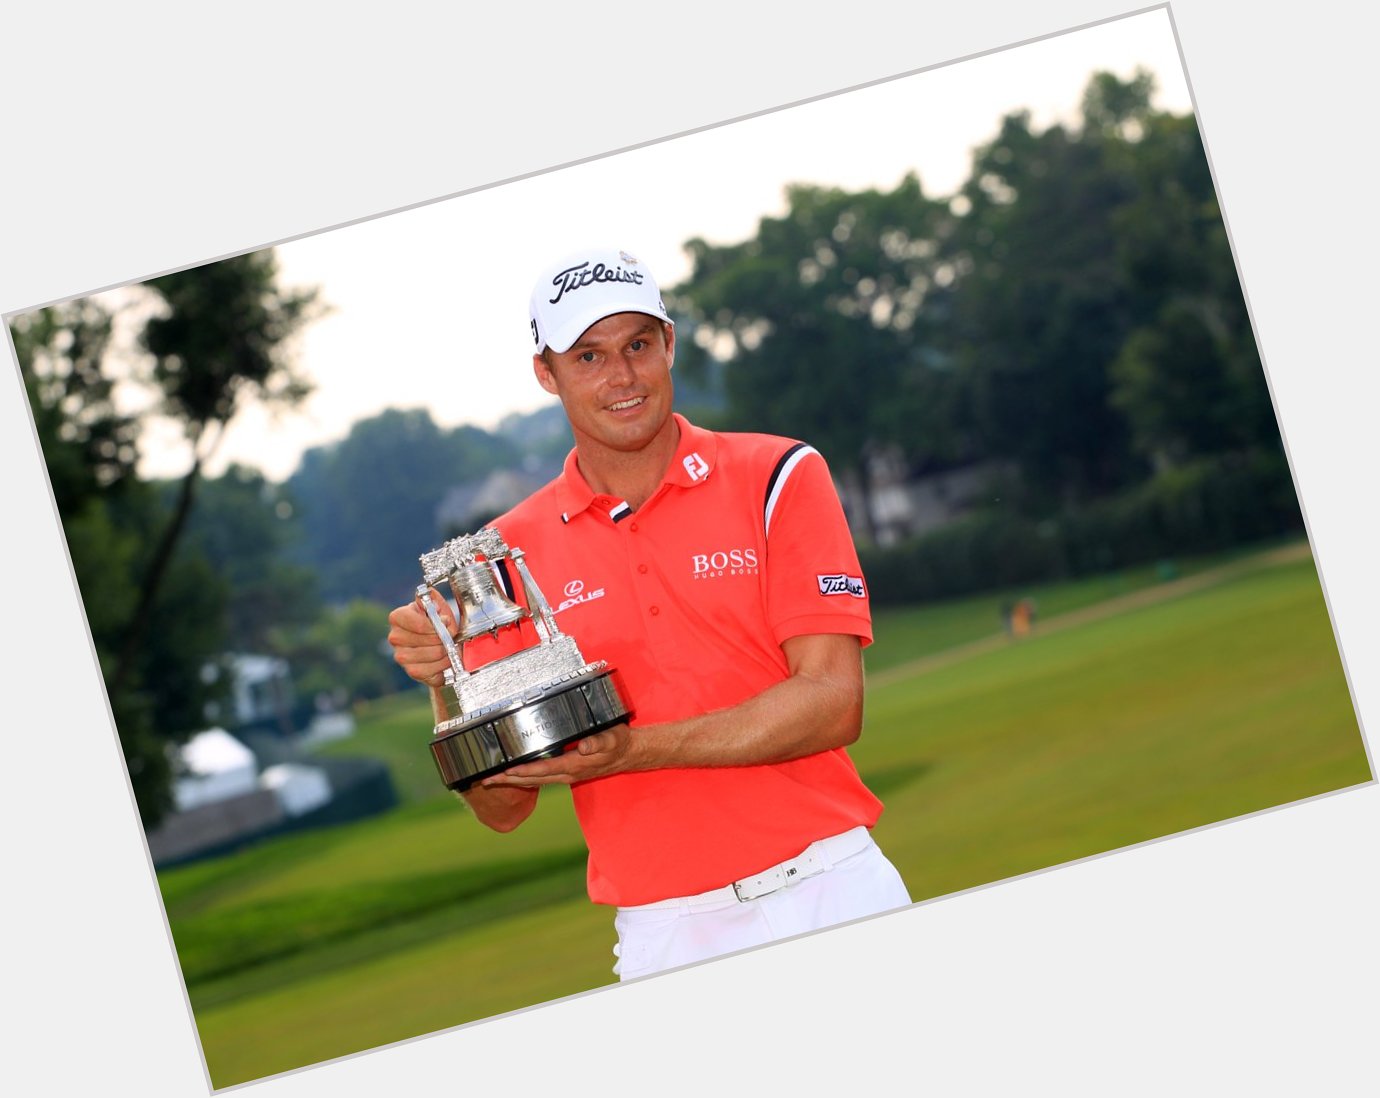 Happy birthday to our 2011 champ Nick Watney 